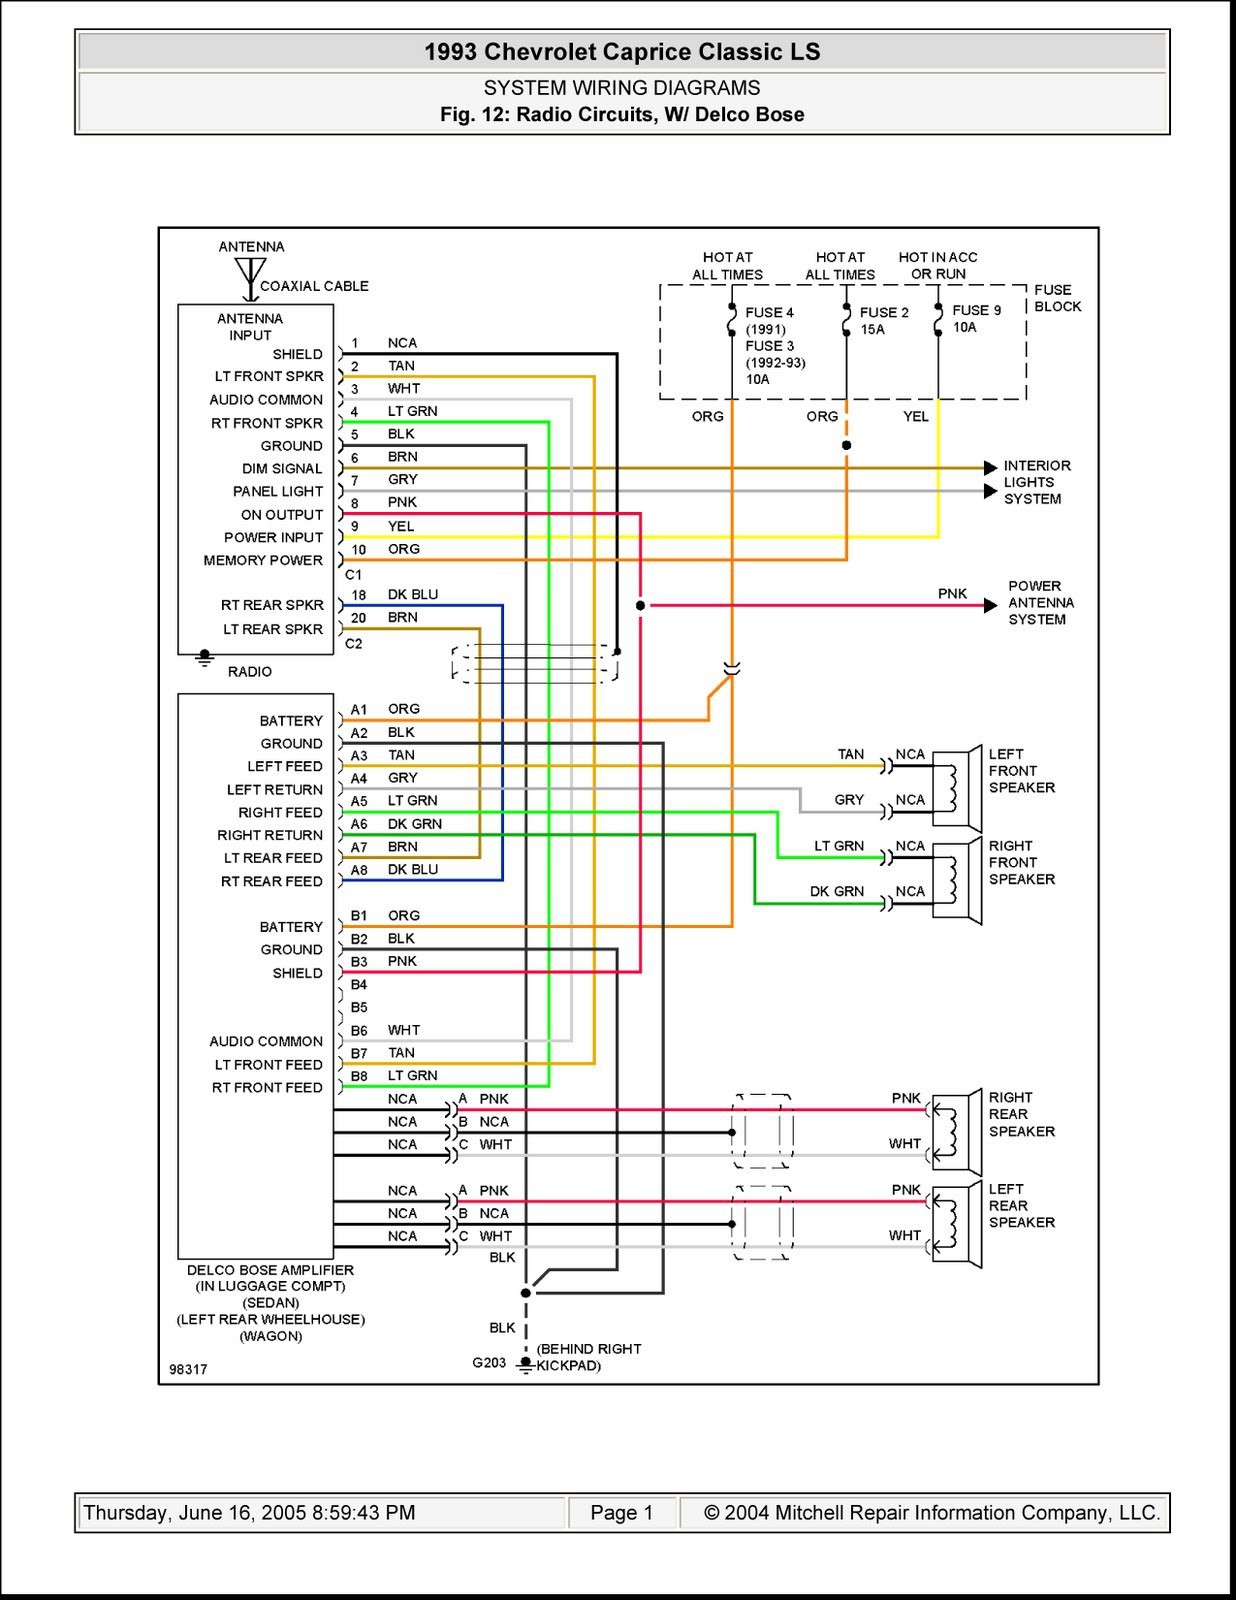 Chevy Radio Wiring Diagram Reference 2003 Chevy Silverado Radio Wiring Diagram Wiring